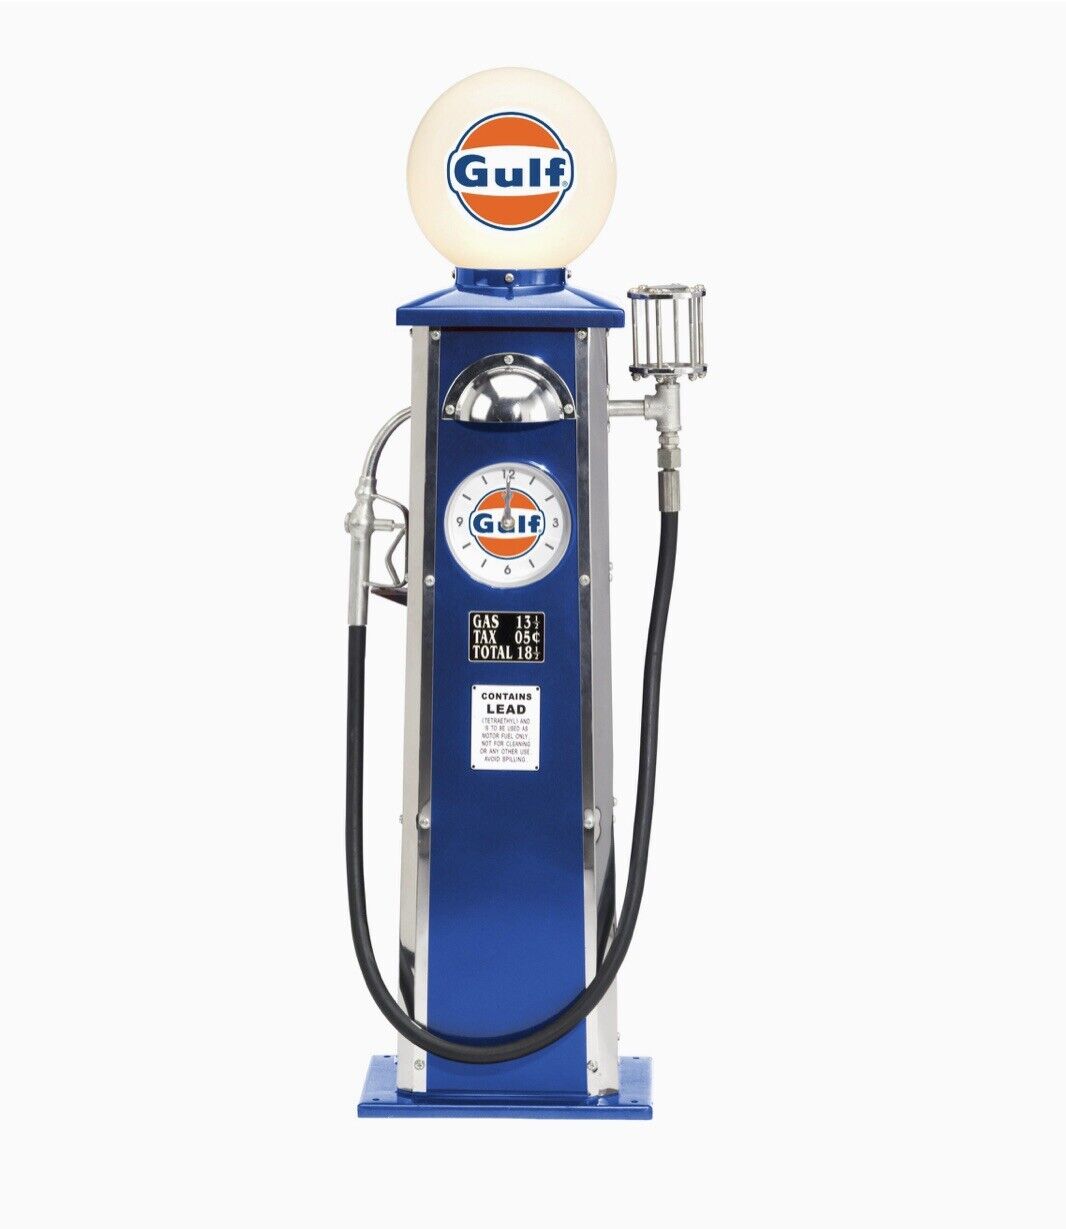 Gulf Oil Old-Time Gas Pump, 40in.H 